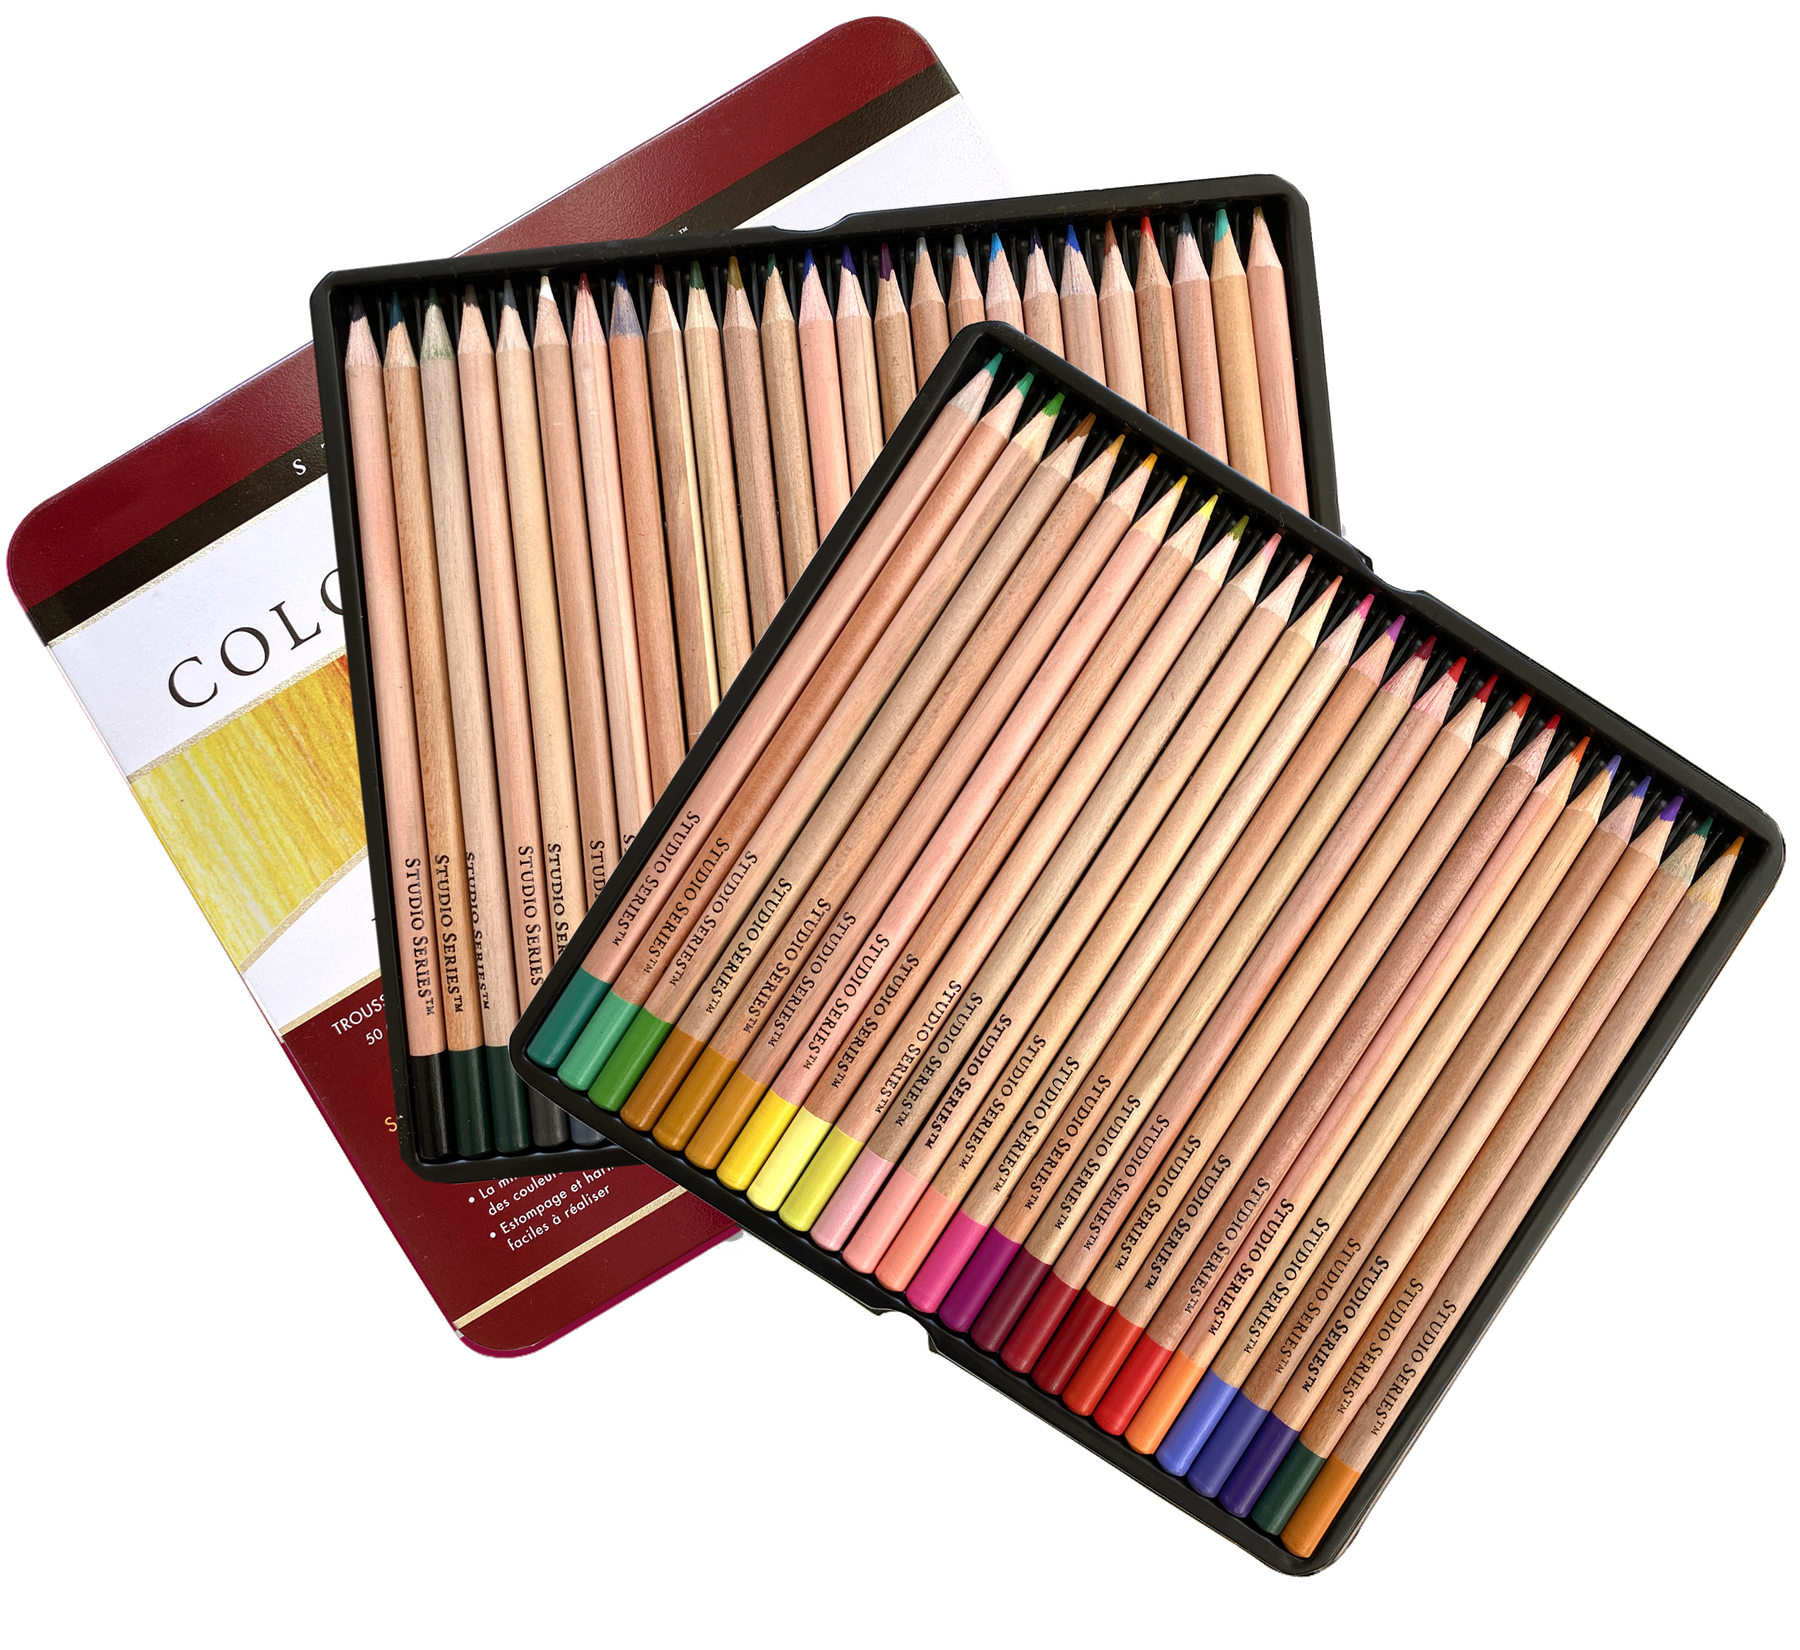  Studio Series Travel Sketch Kit (40 pieces with sturdy,  zippered case): 9781441335739: Peter Pauper Press: Books